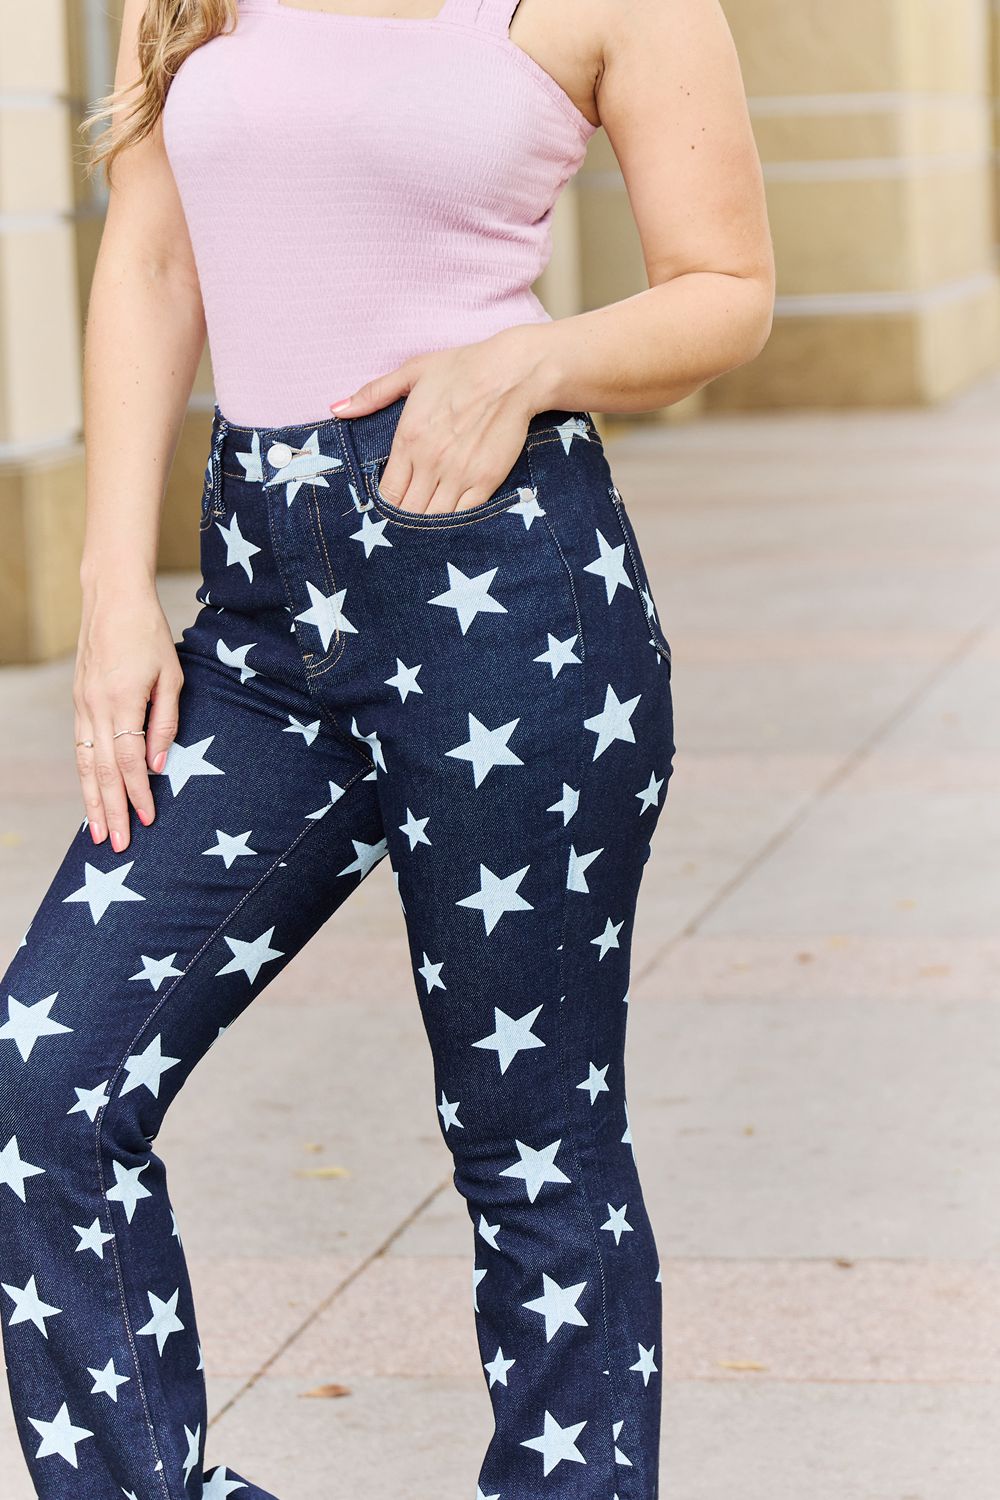 Judy Blue Janelle Full Size High Waist Star Print Flare Jeans - nailedmoms